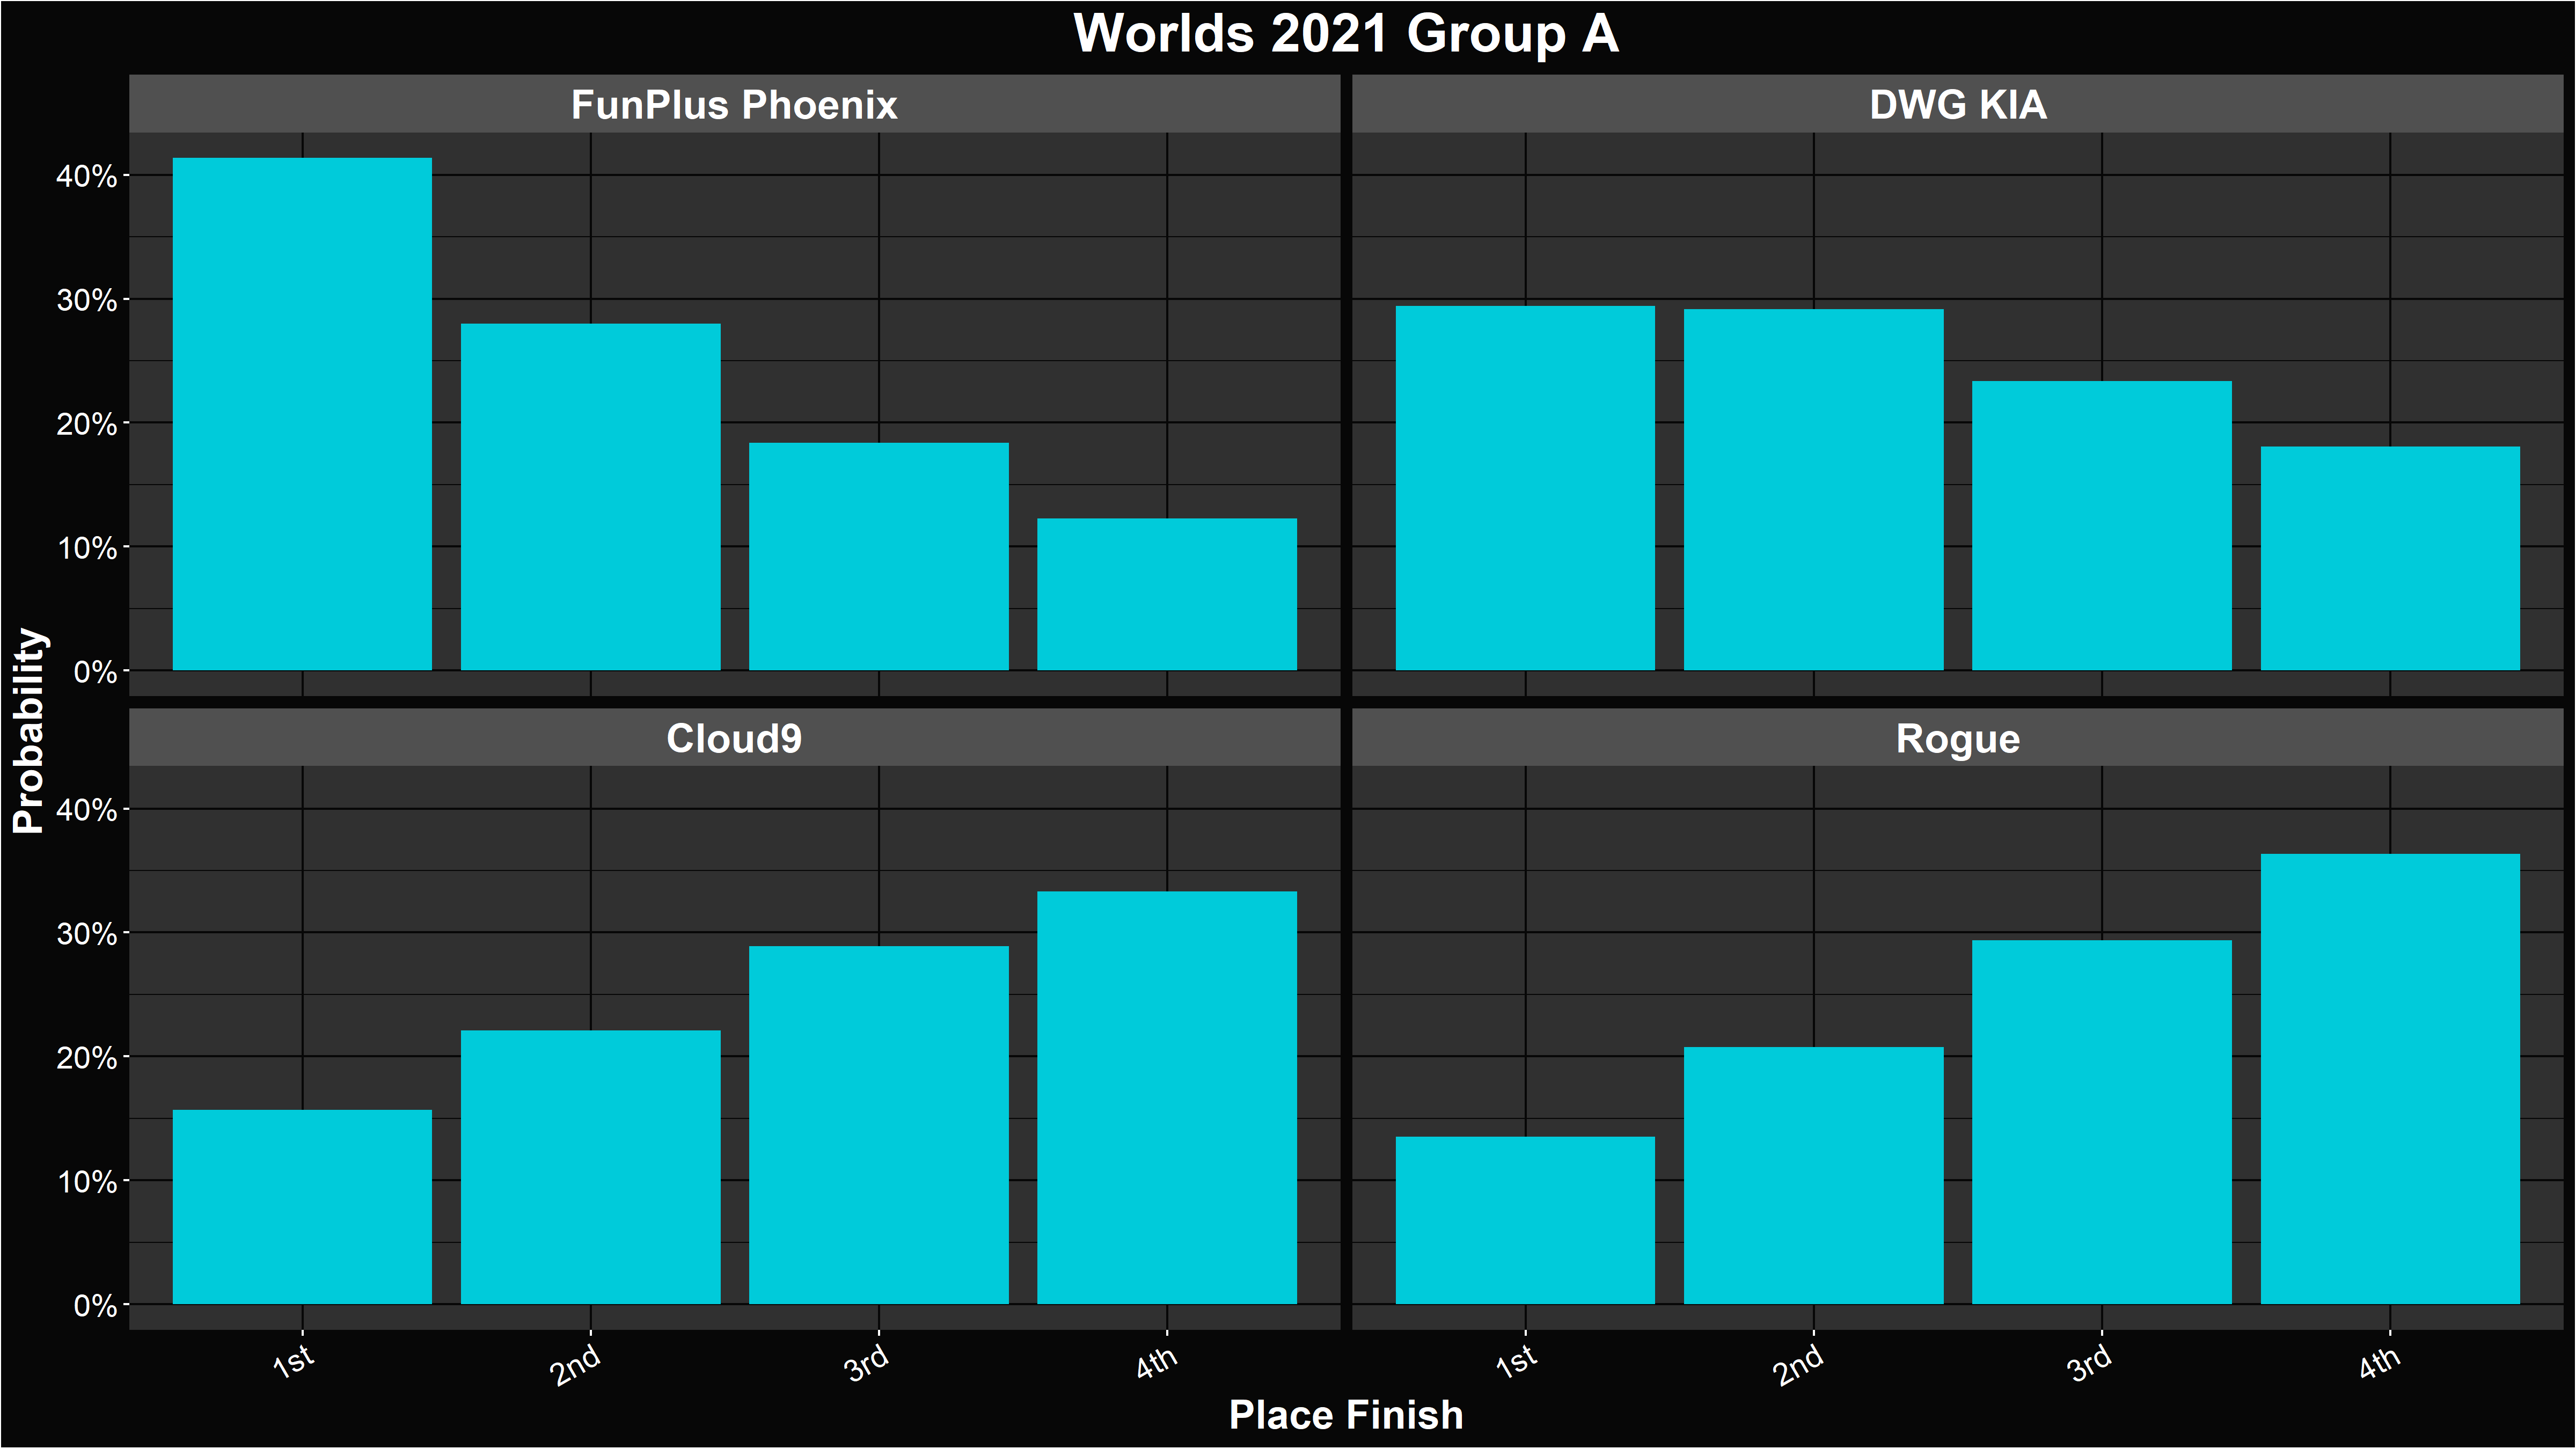 Alacrity's LoL Worlds 2021 Group A Placement Distribution